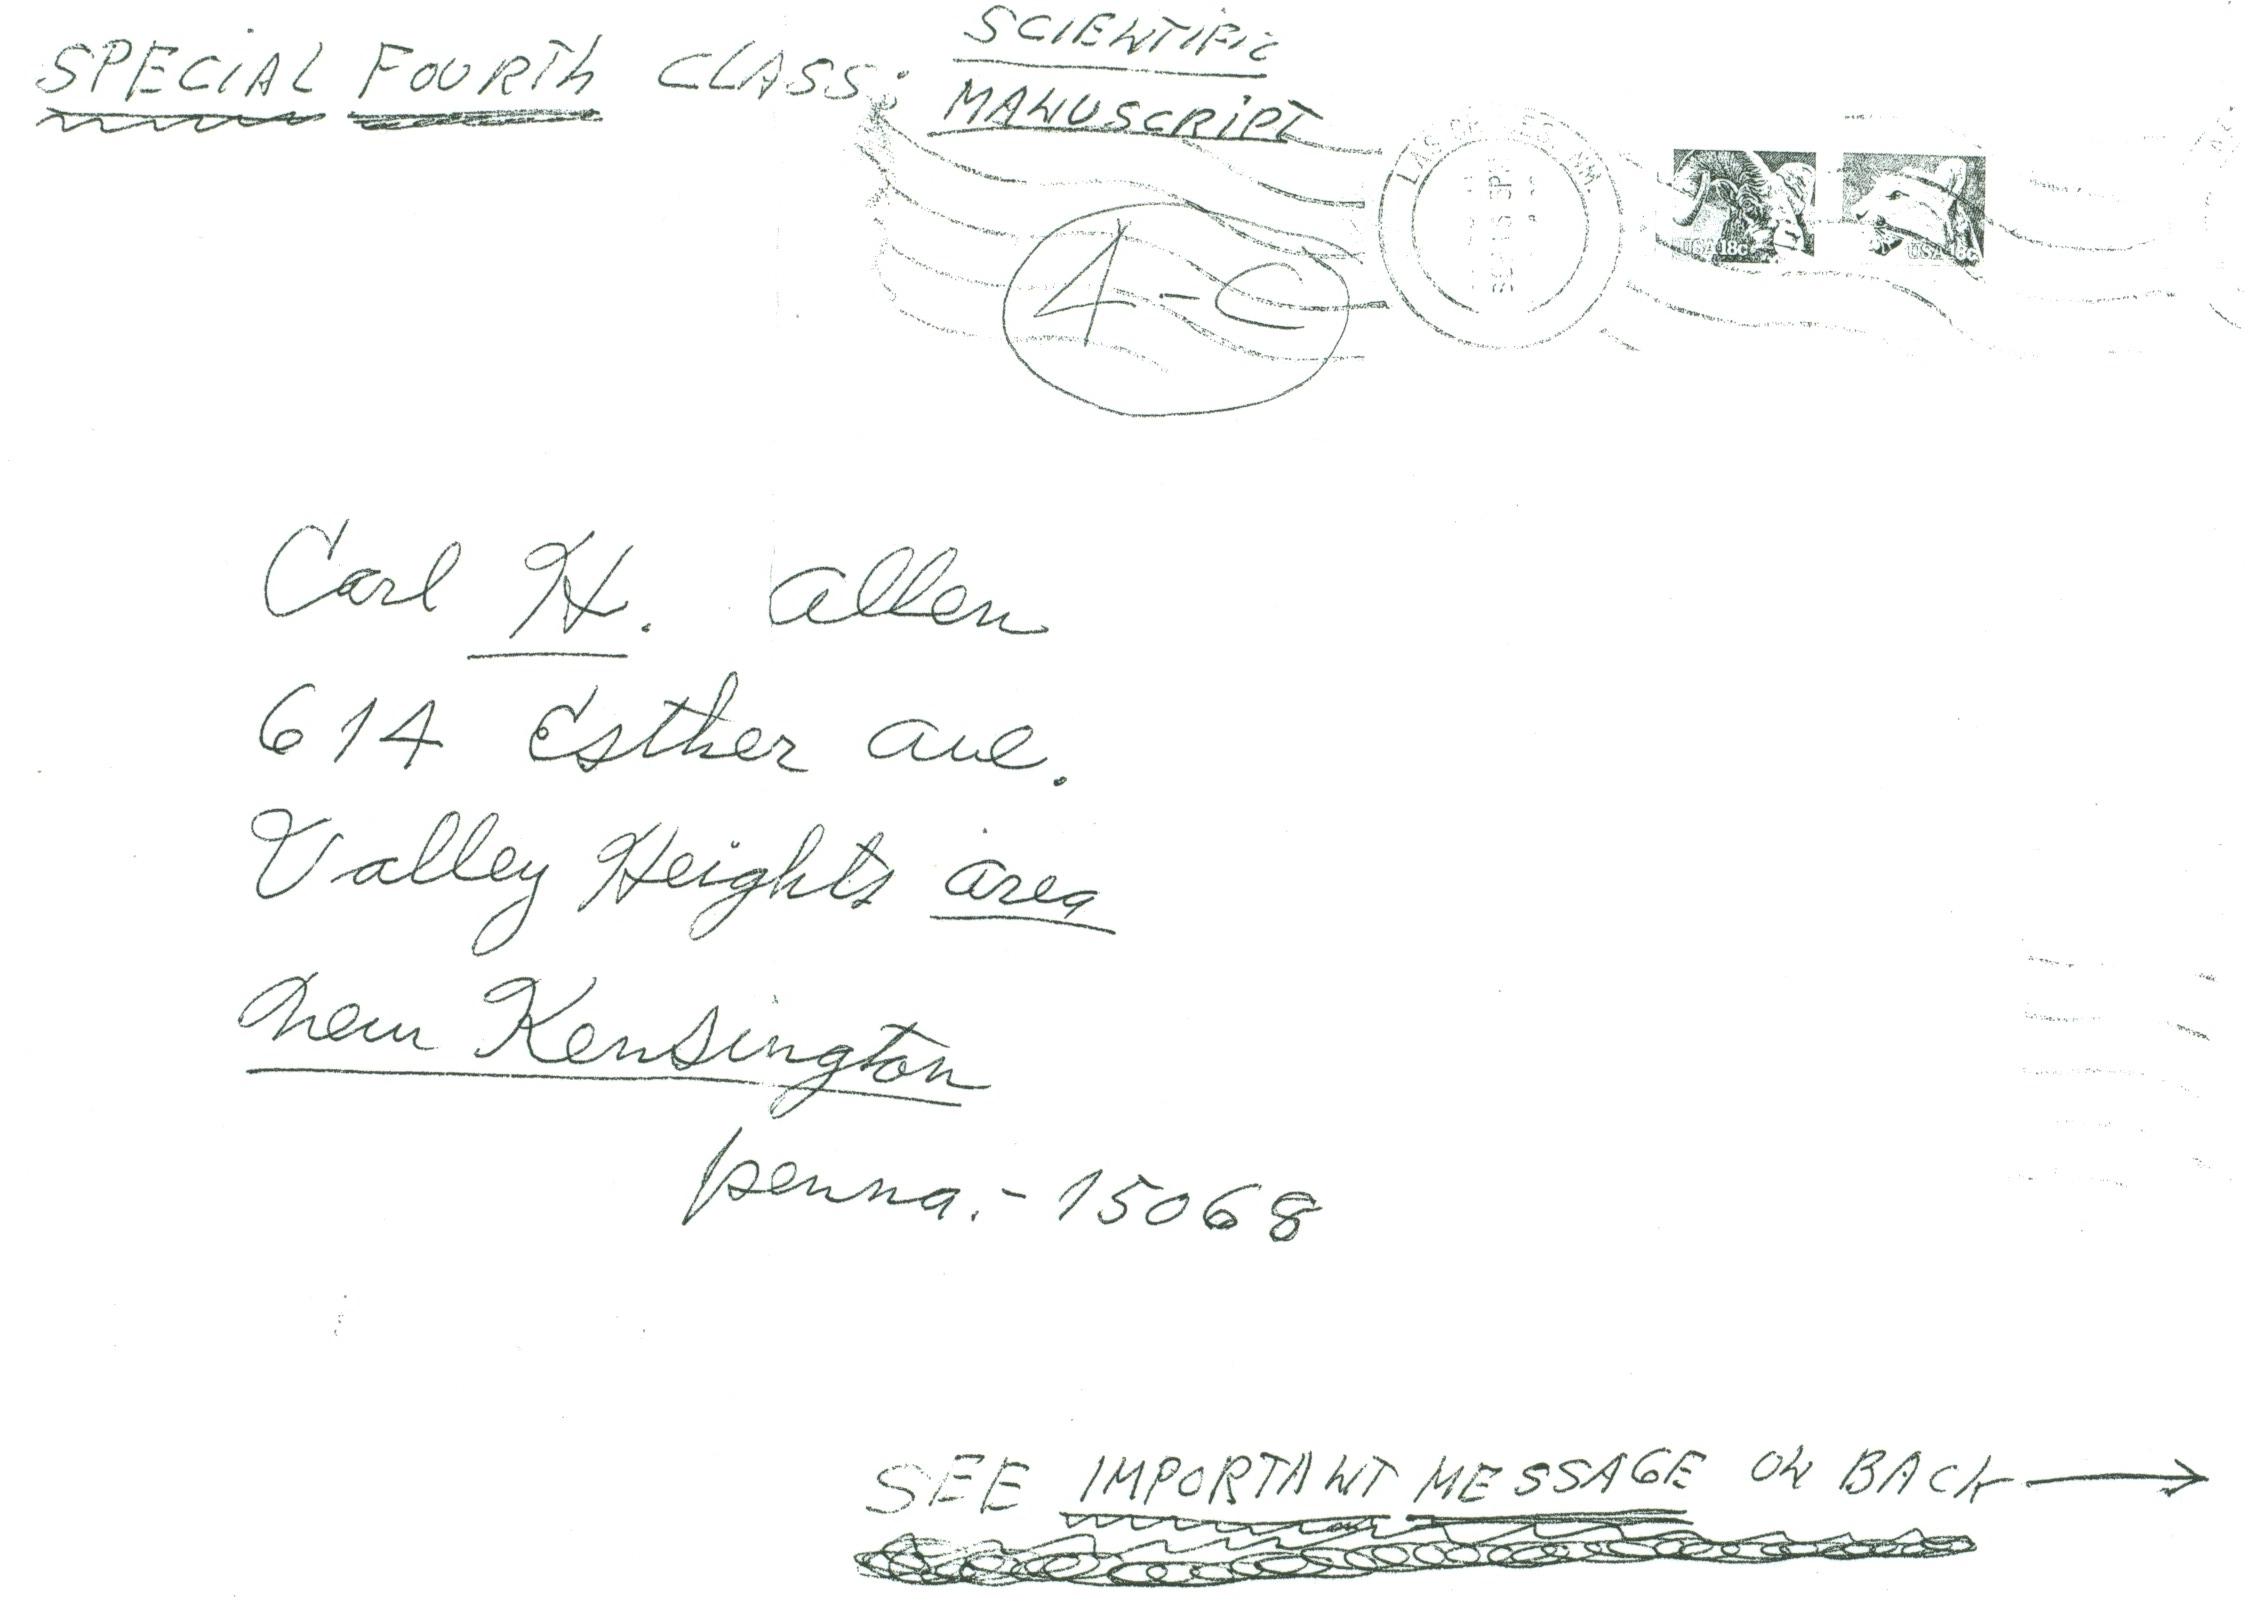 (RG) September-1981, Scientific Manuscript Envelope from Carl Allen to his father